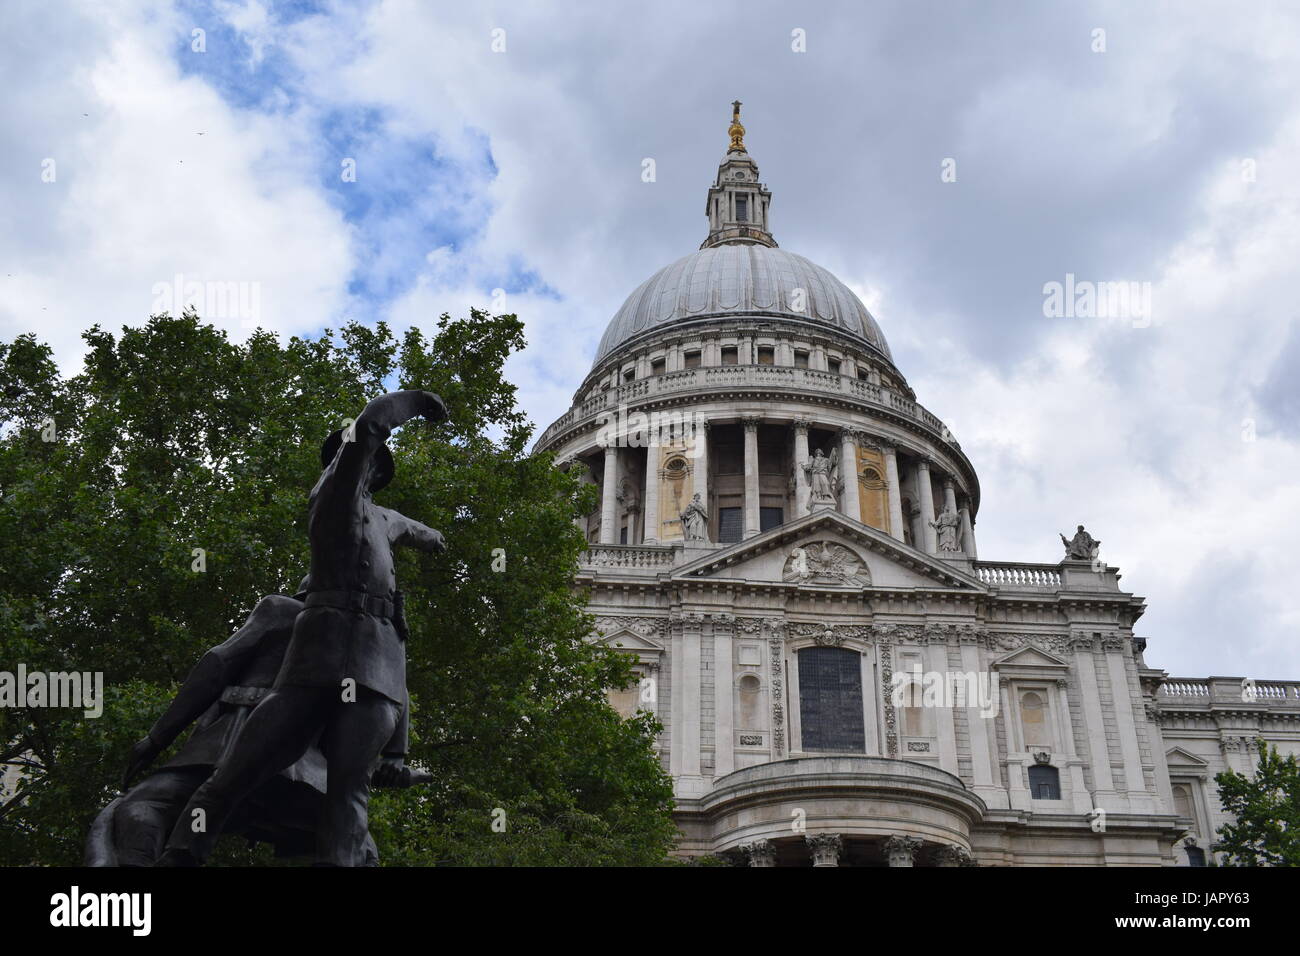 St. Pauls Cathedral 2016 Stockfoto